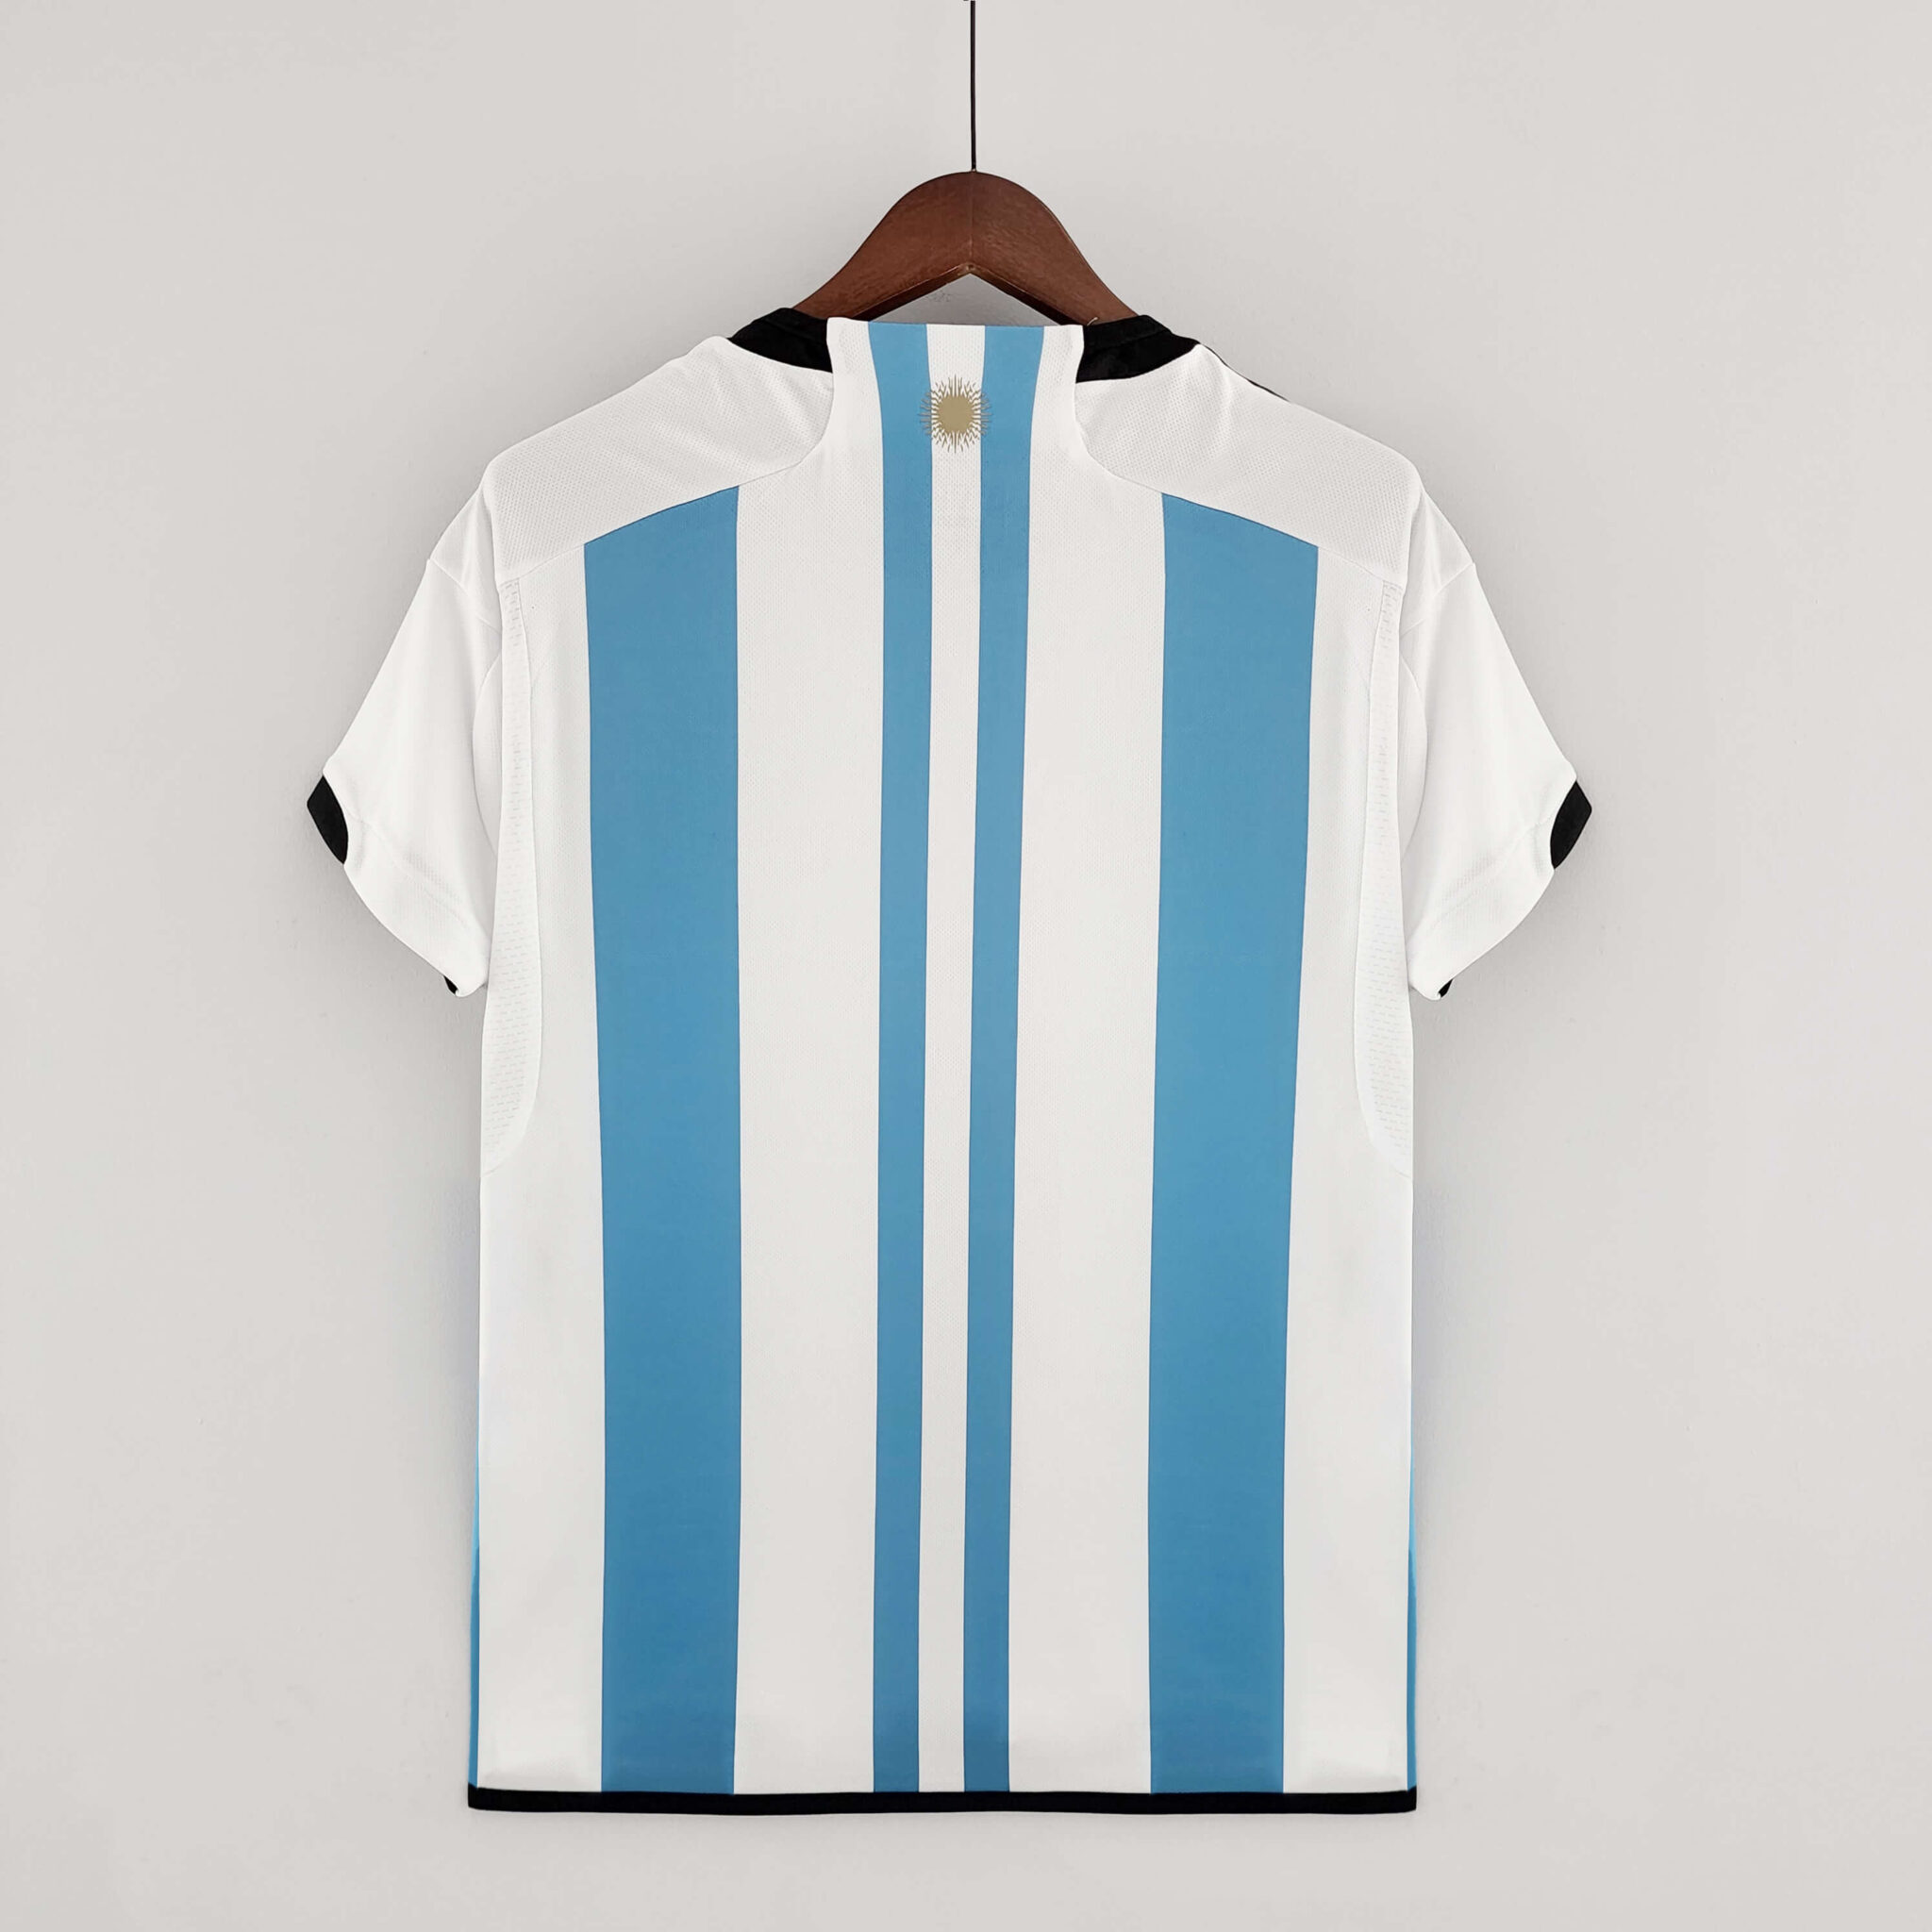 New Argentina National Team 2022 Word Cup Home Shirts | Footyshirts.